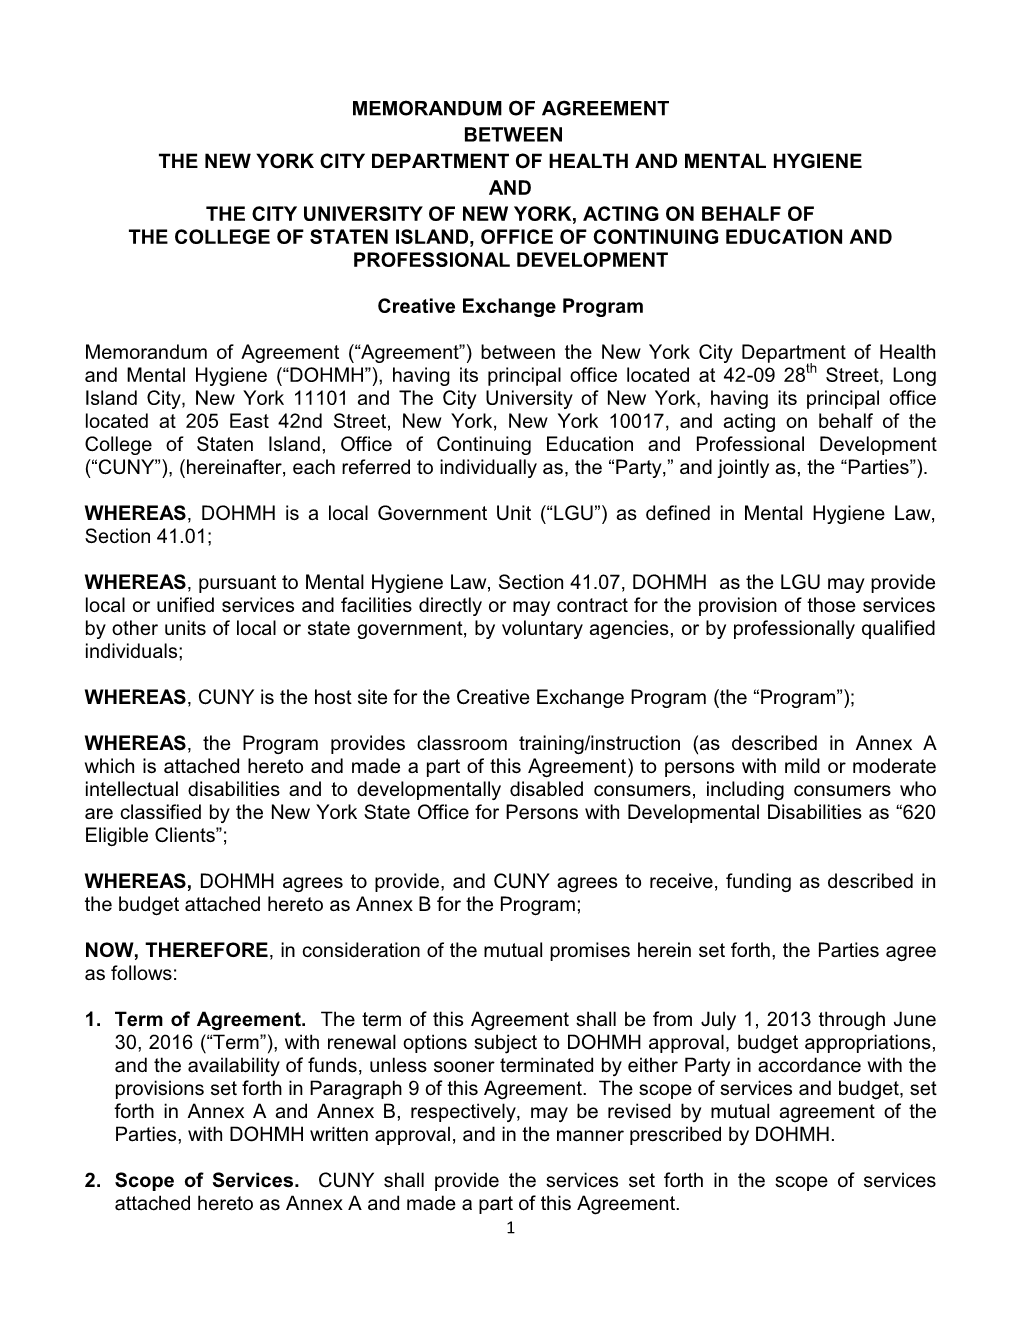 Memorandum of Agreement Between the New York City Department of Health and Mental Hygiene and the City University of New York, A